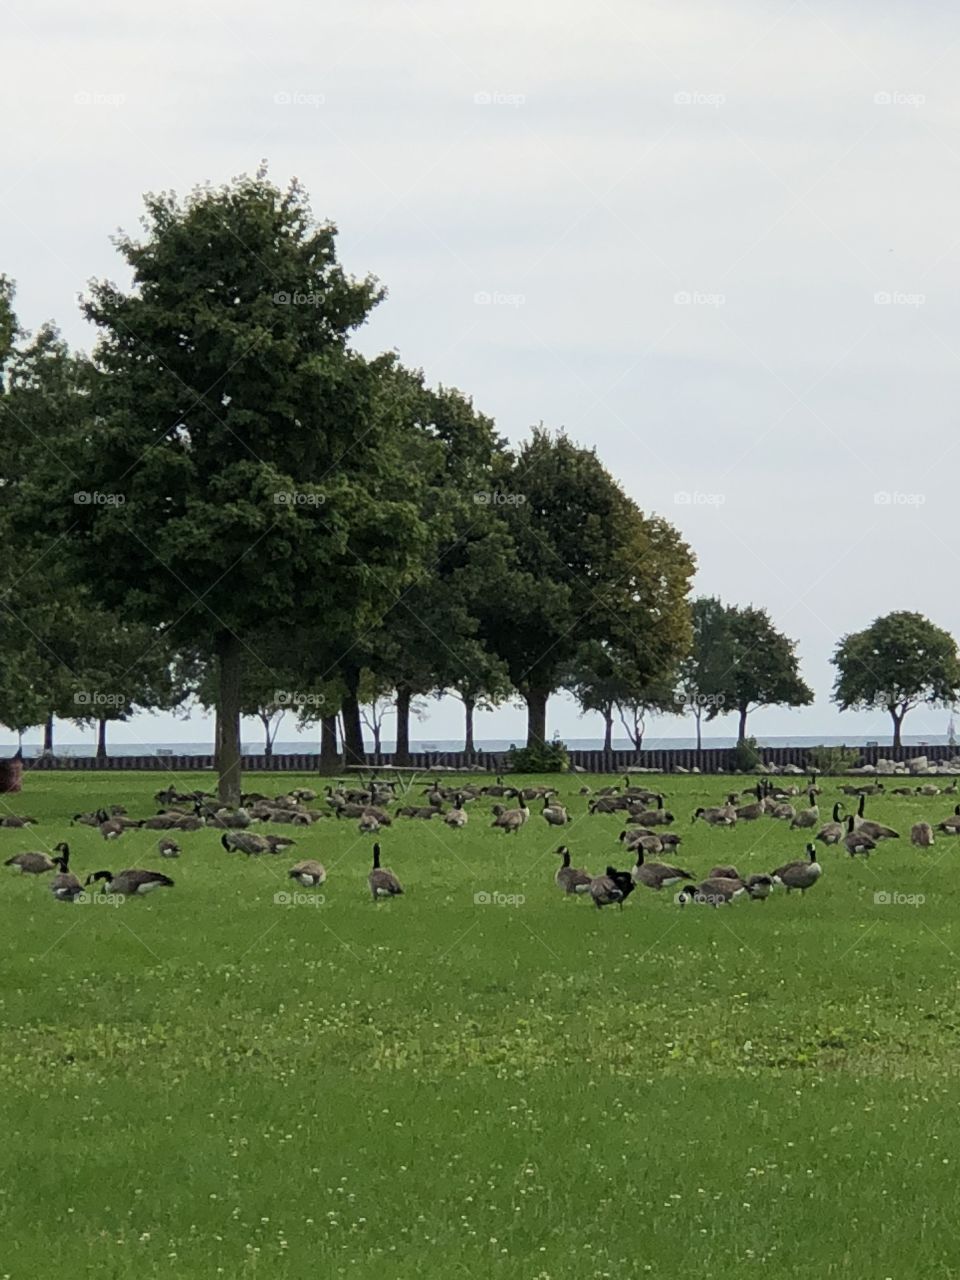 A flock of geese + trees 🌳